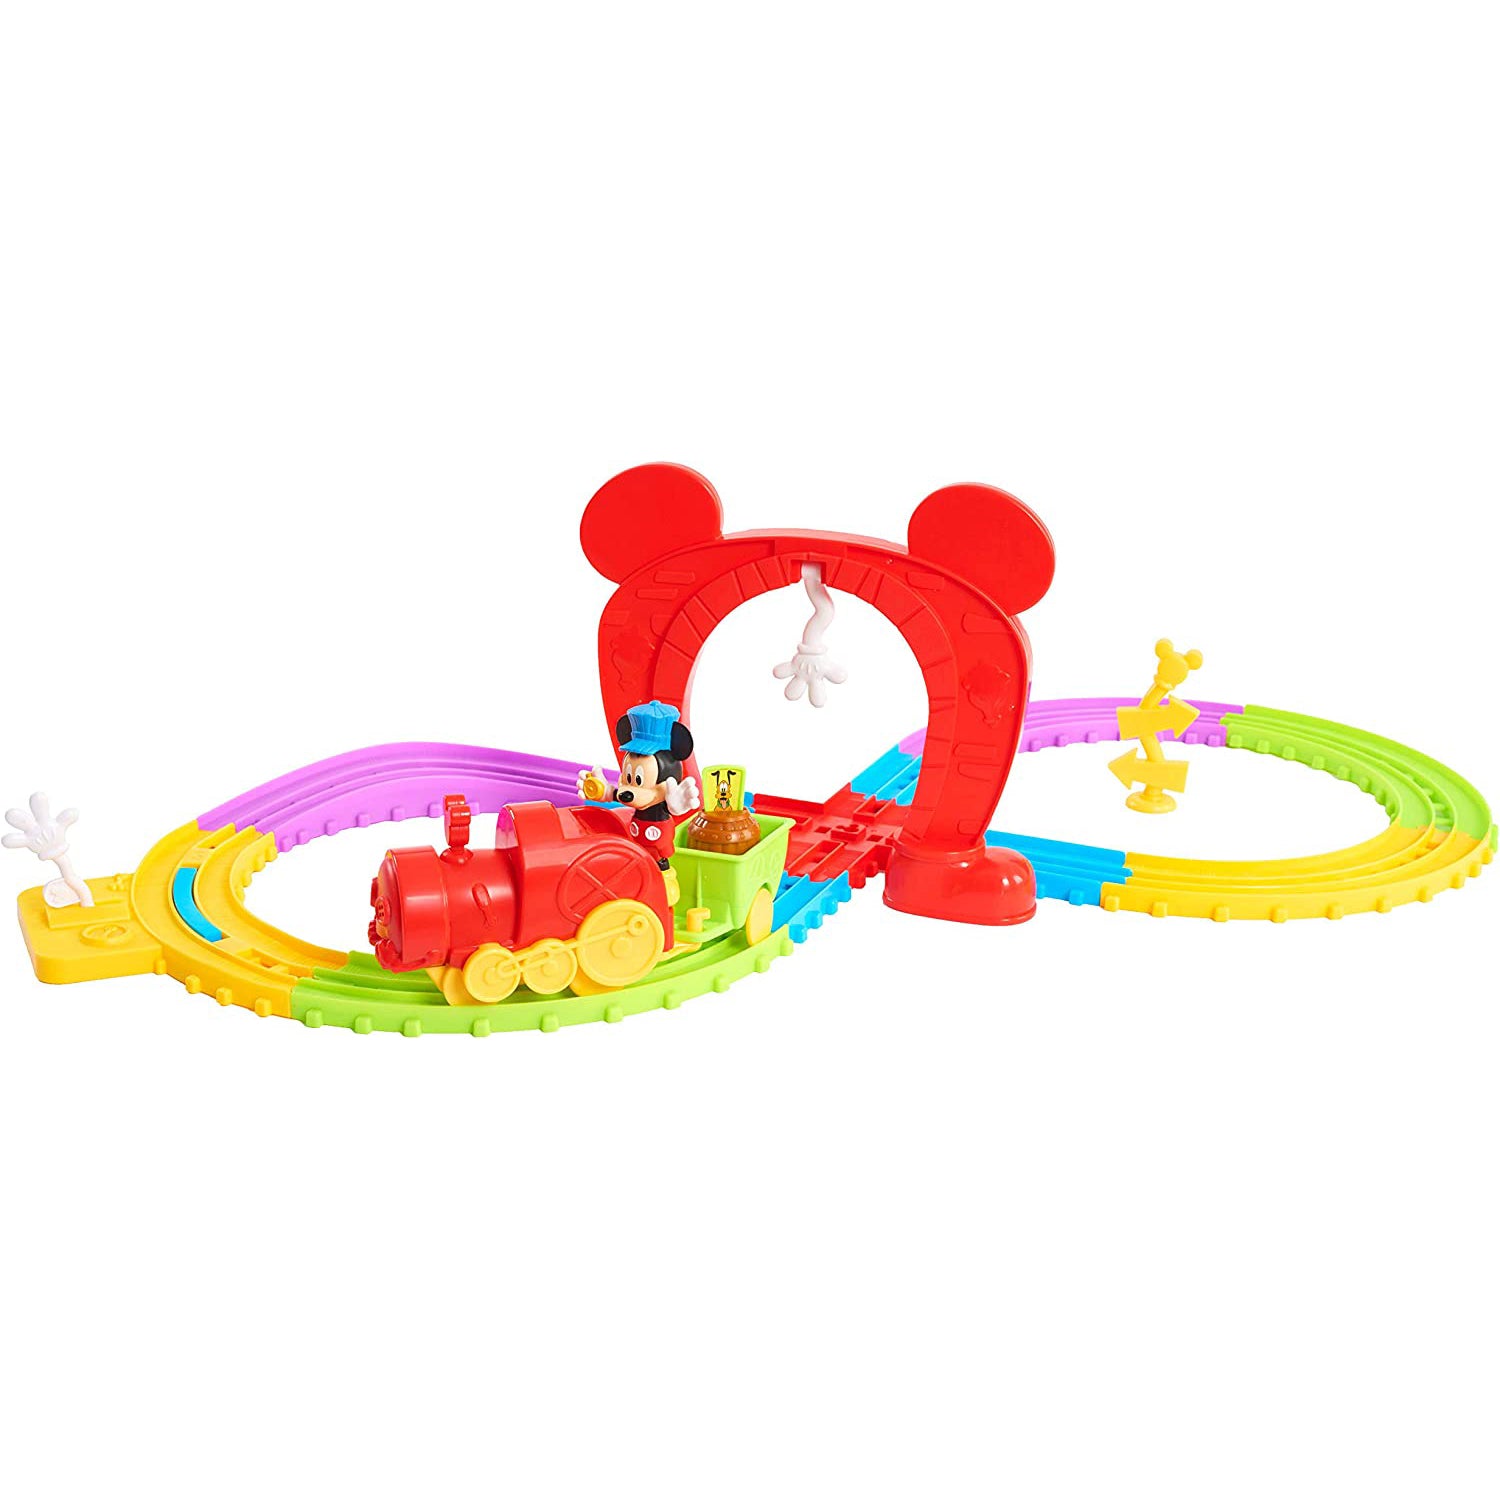 Disney’s Mickey Mouse Mickey’s Musical Express Train Set